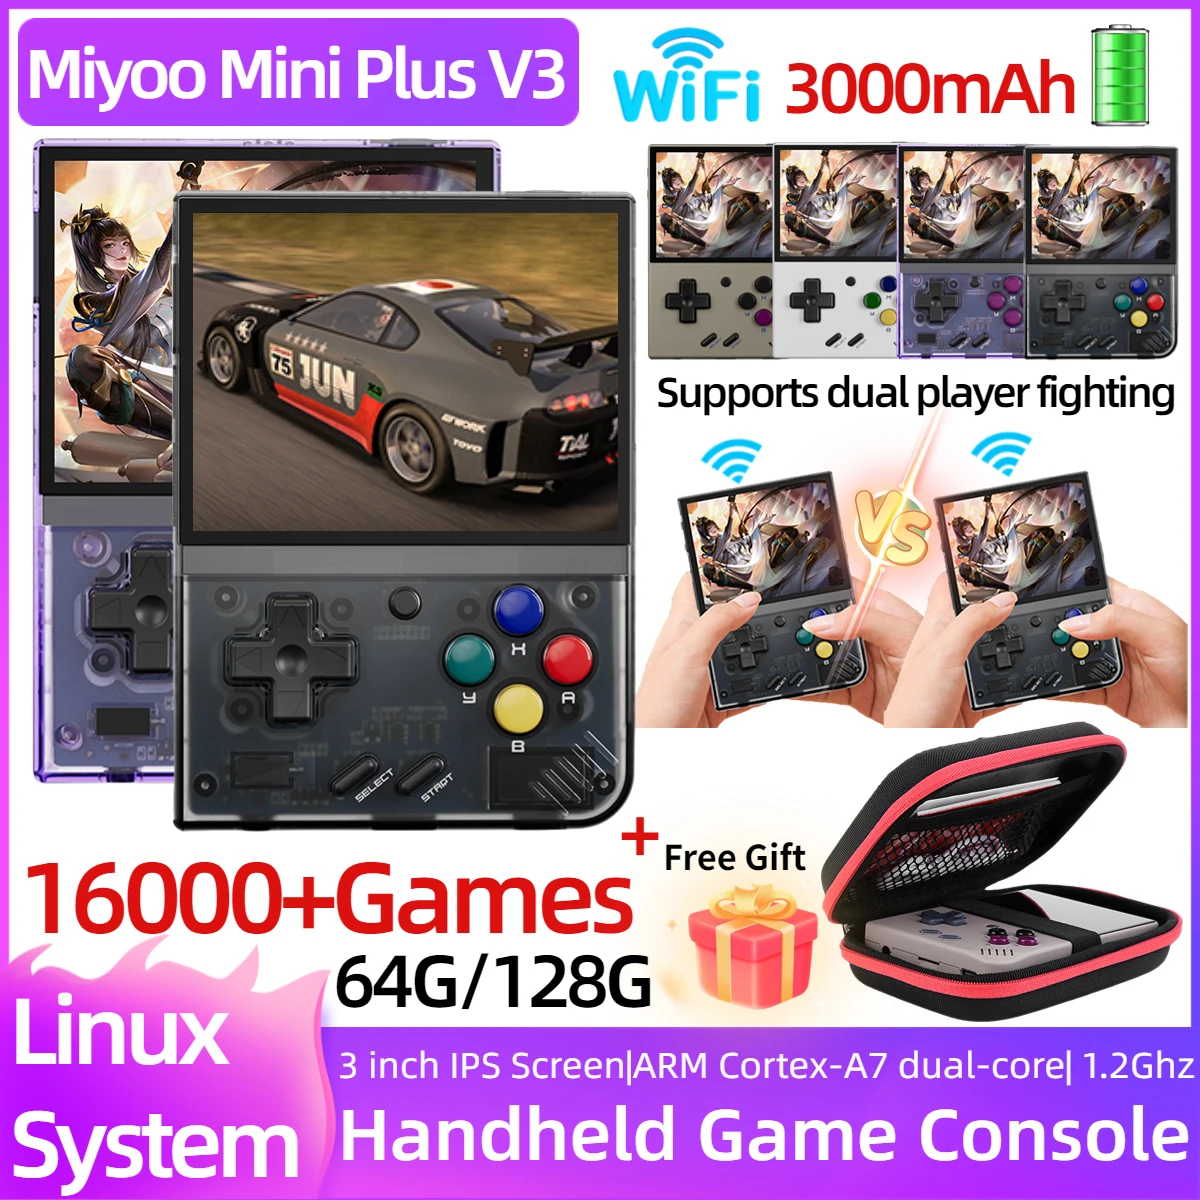 Miyoo Mini Plus V3 Retro Handheld Game Console 3.5Inch IPS HD Screen 3000mAh WiFi 16000Games Linux System Portable Video Players